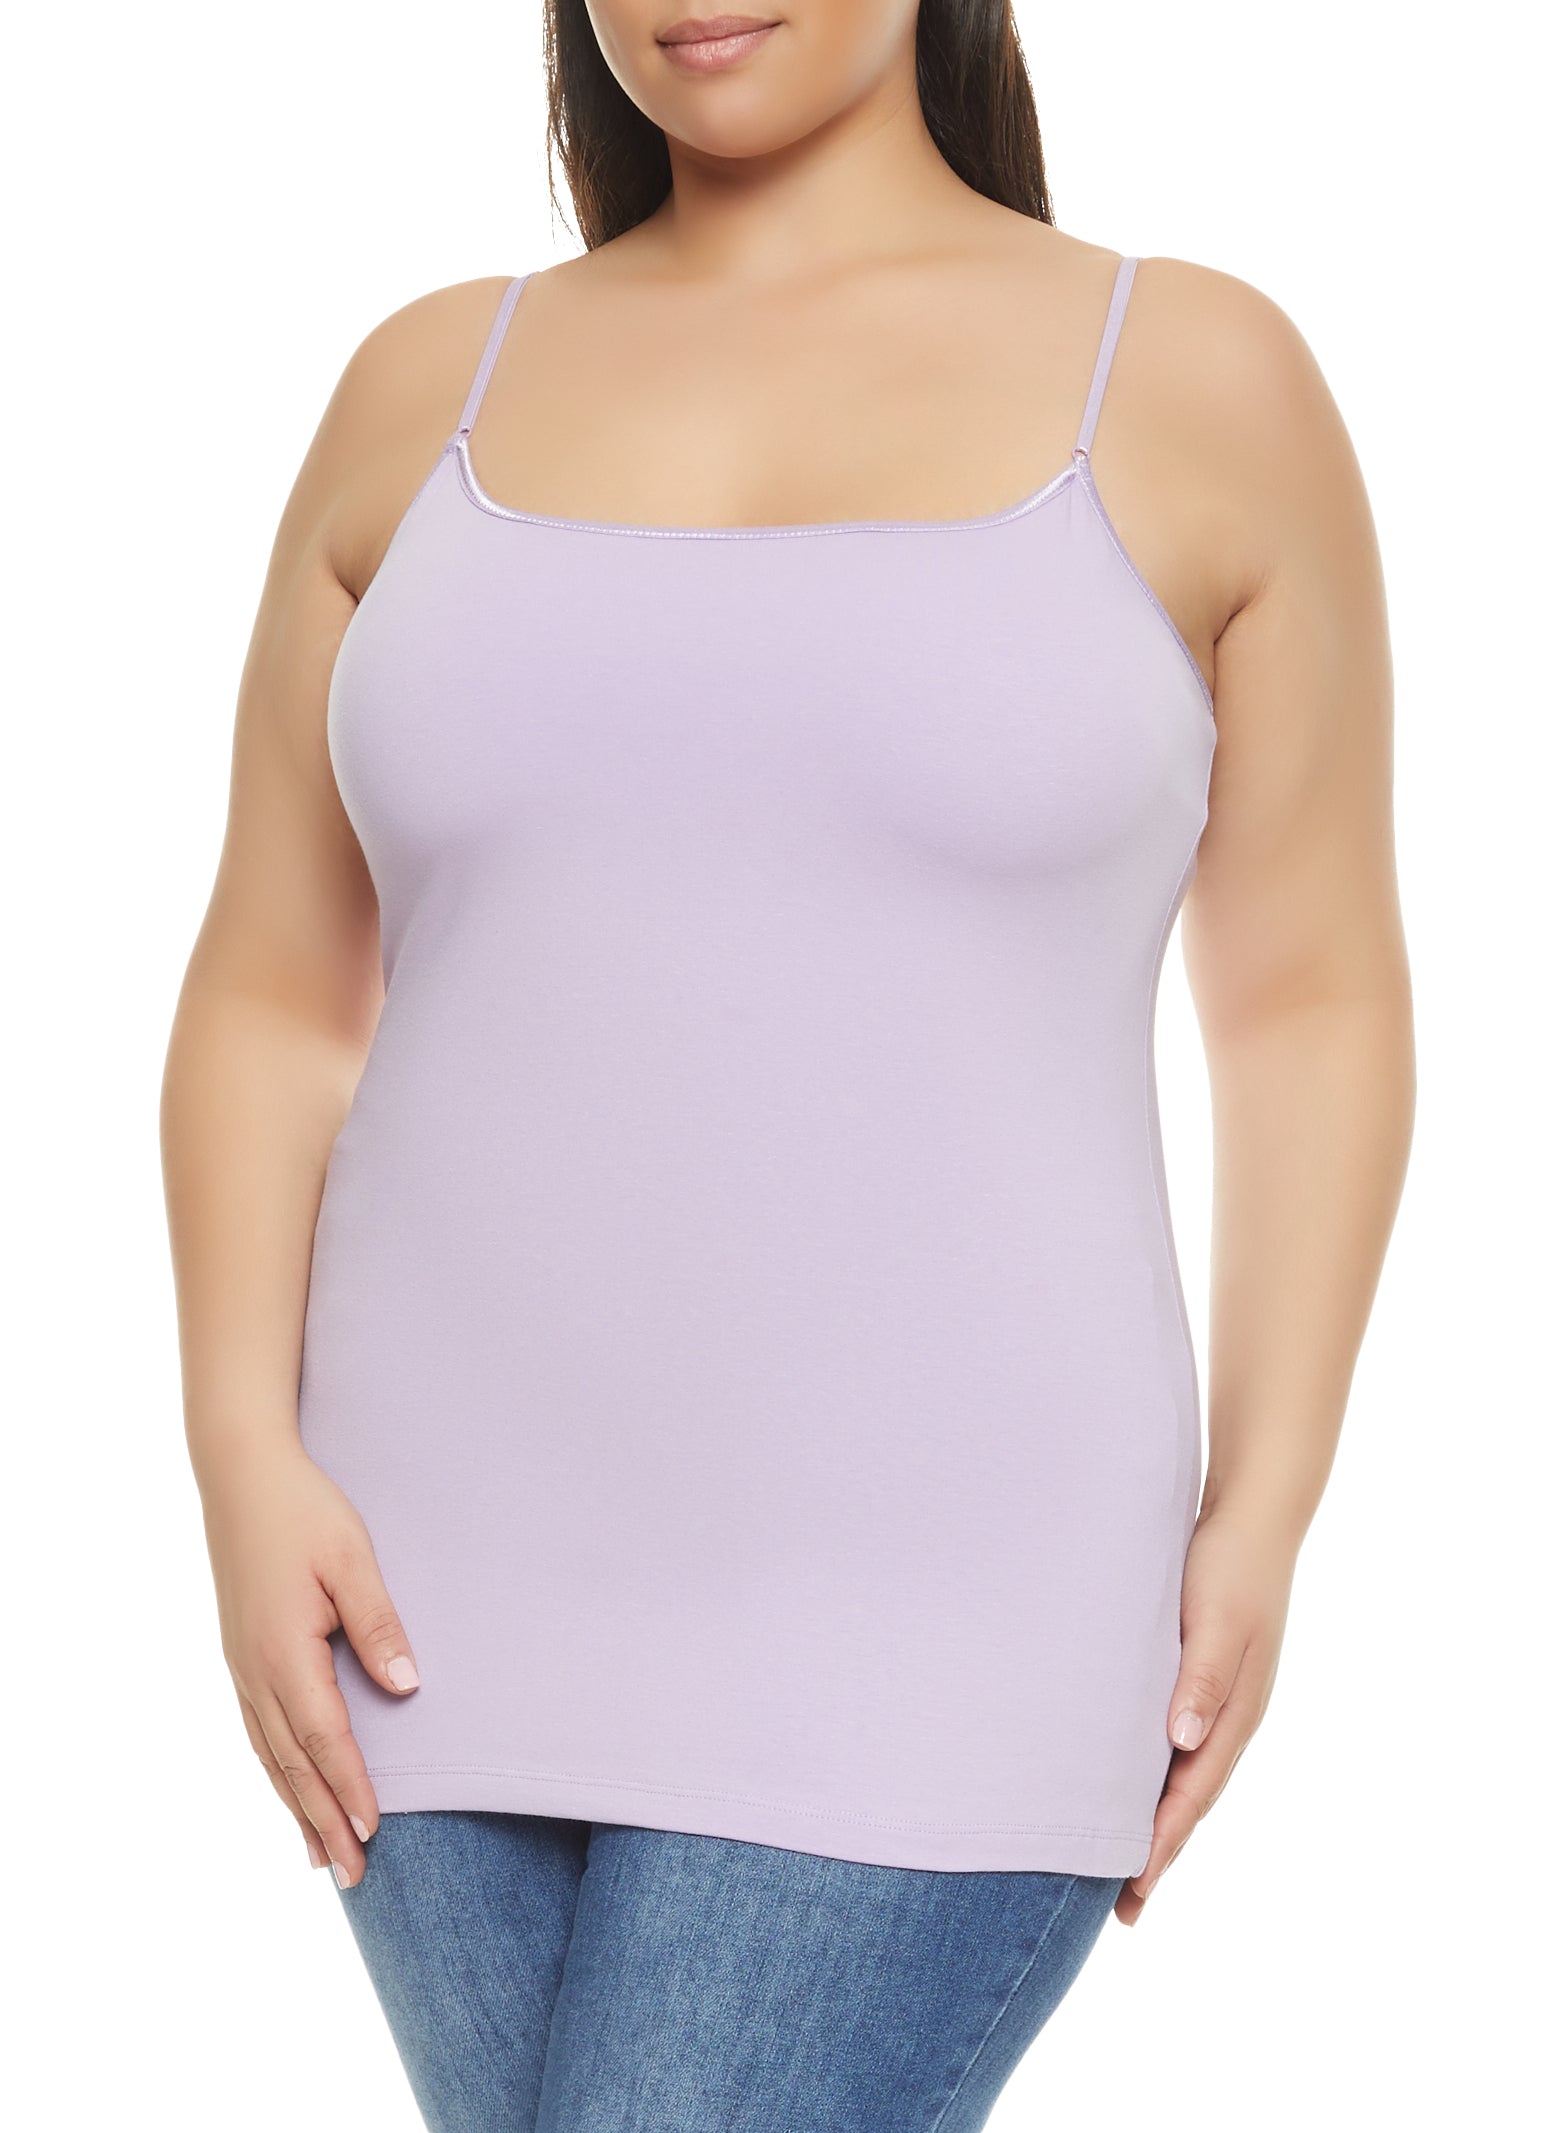 Plus Size Solid Built In Bra Cami